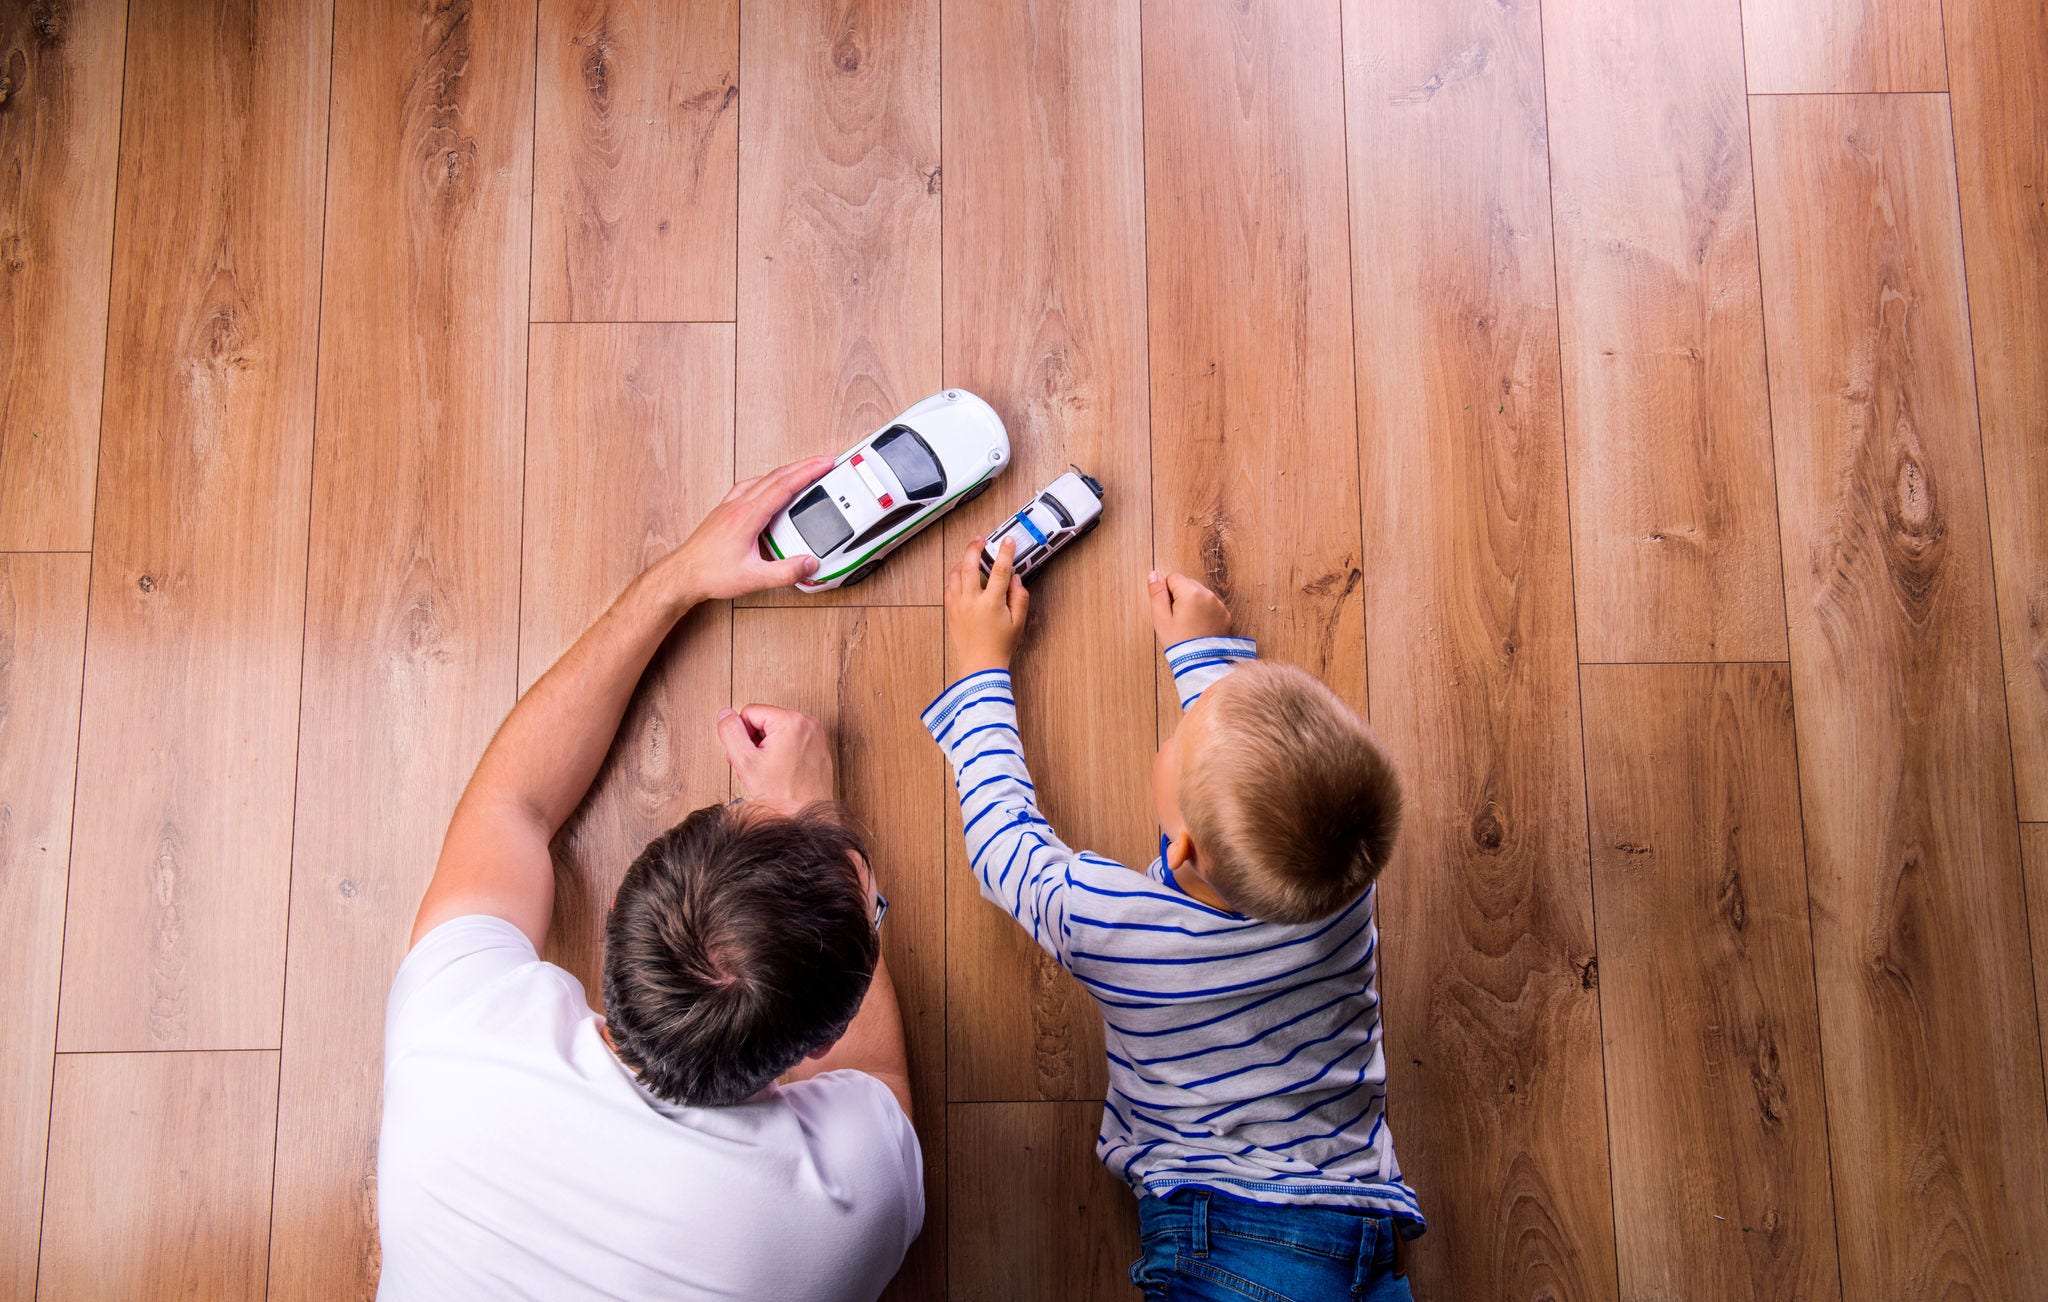 father with his son playing with cars on wood floor